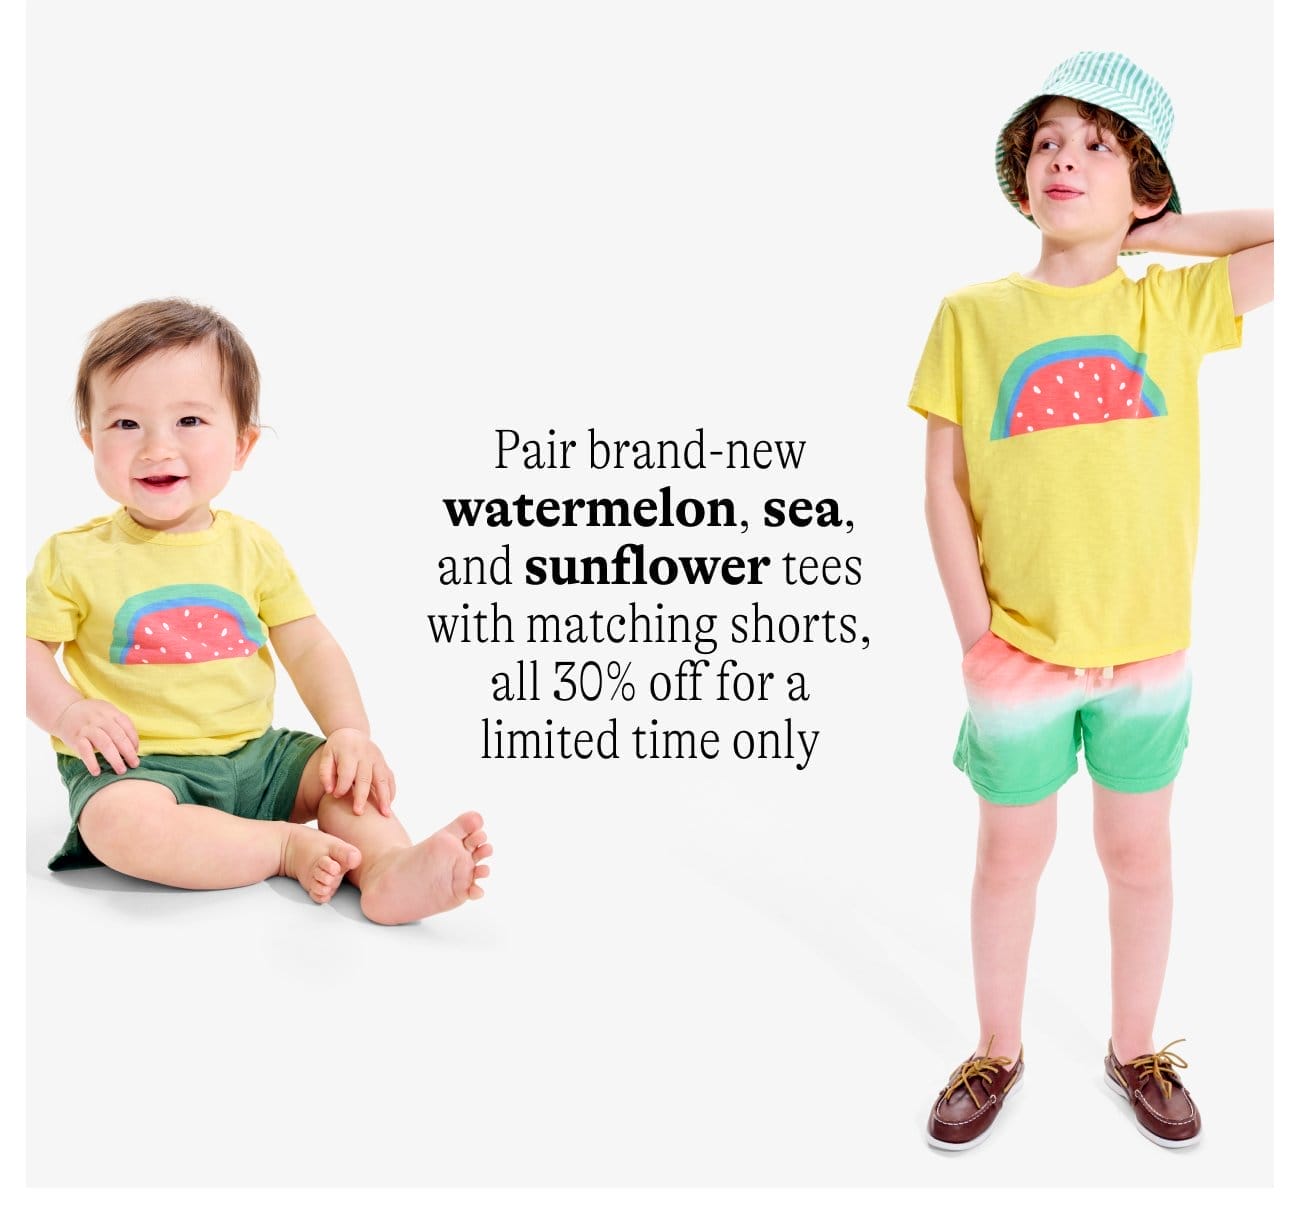 Pair brand-new watermelon, sea, and sunflower tees with matching shorts, all 30% off for a limited time only